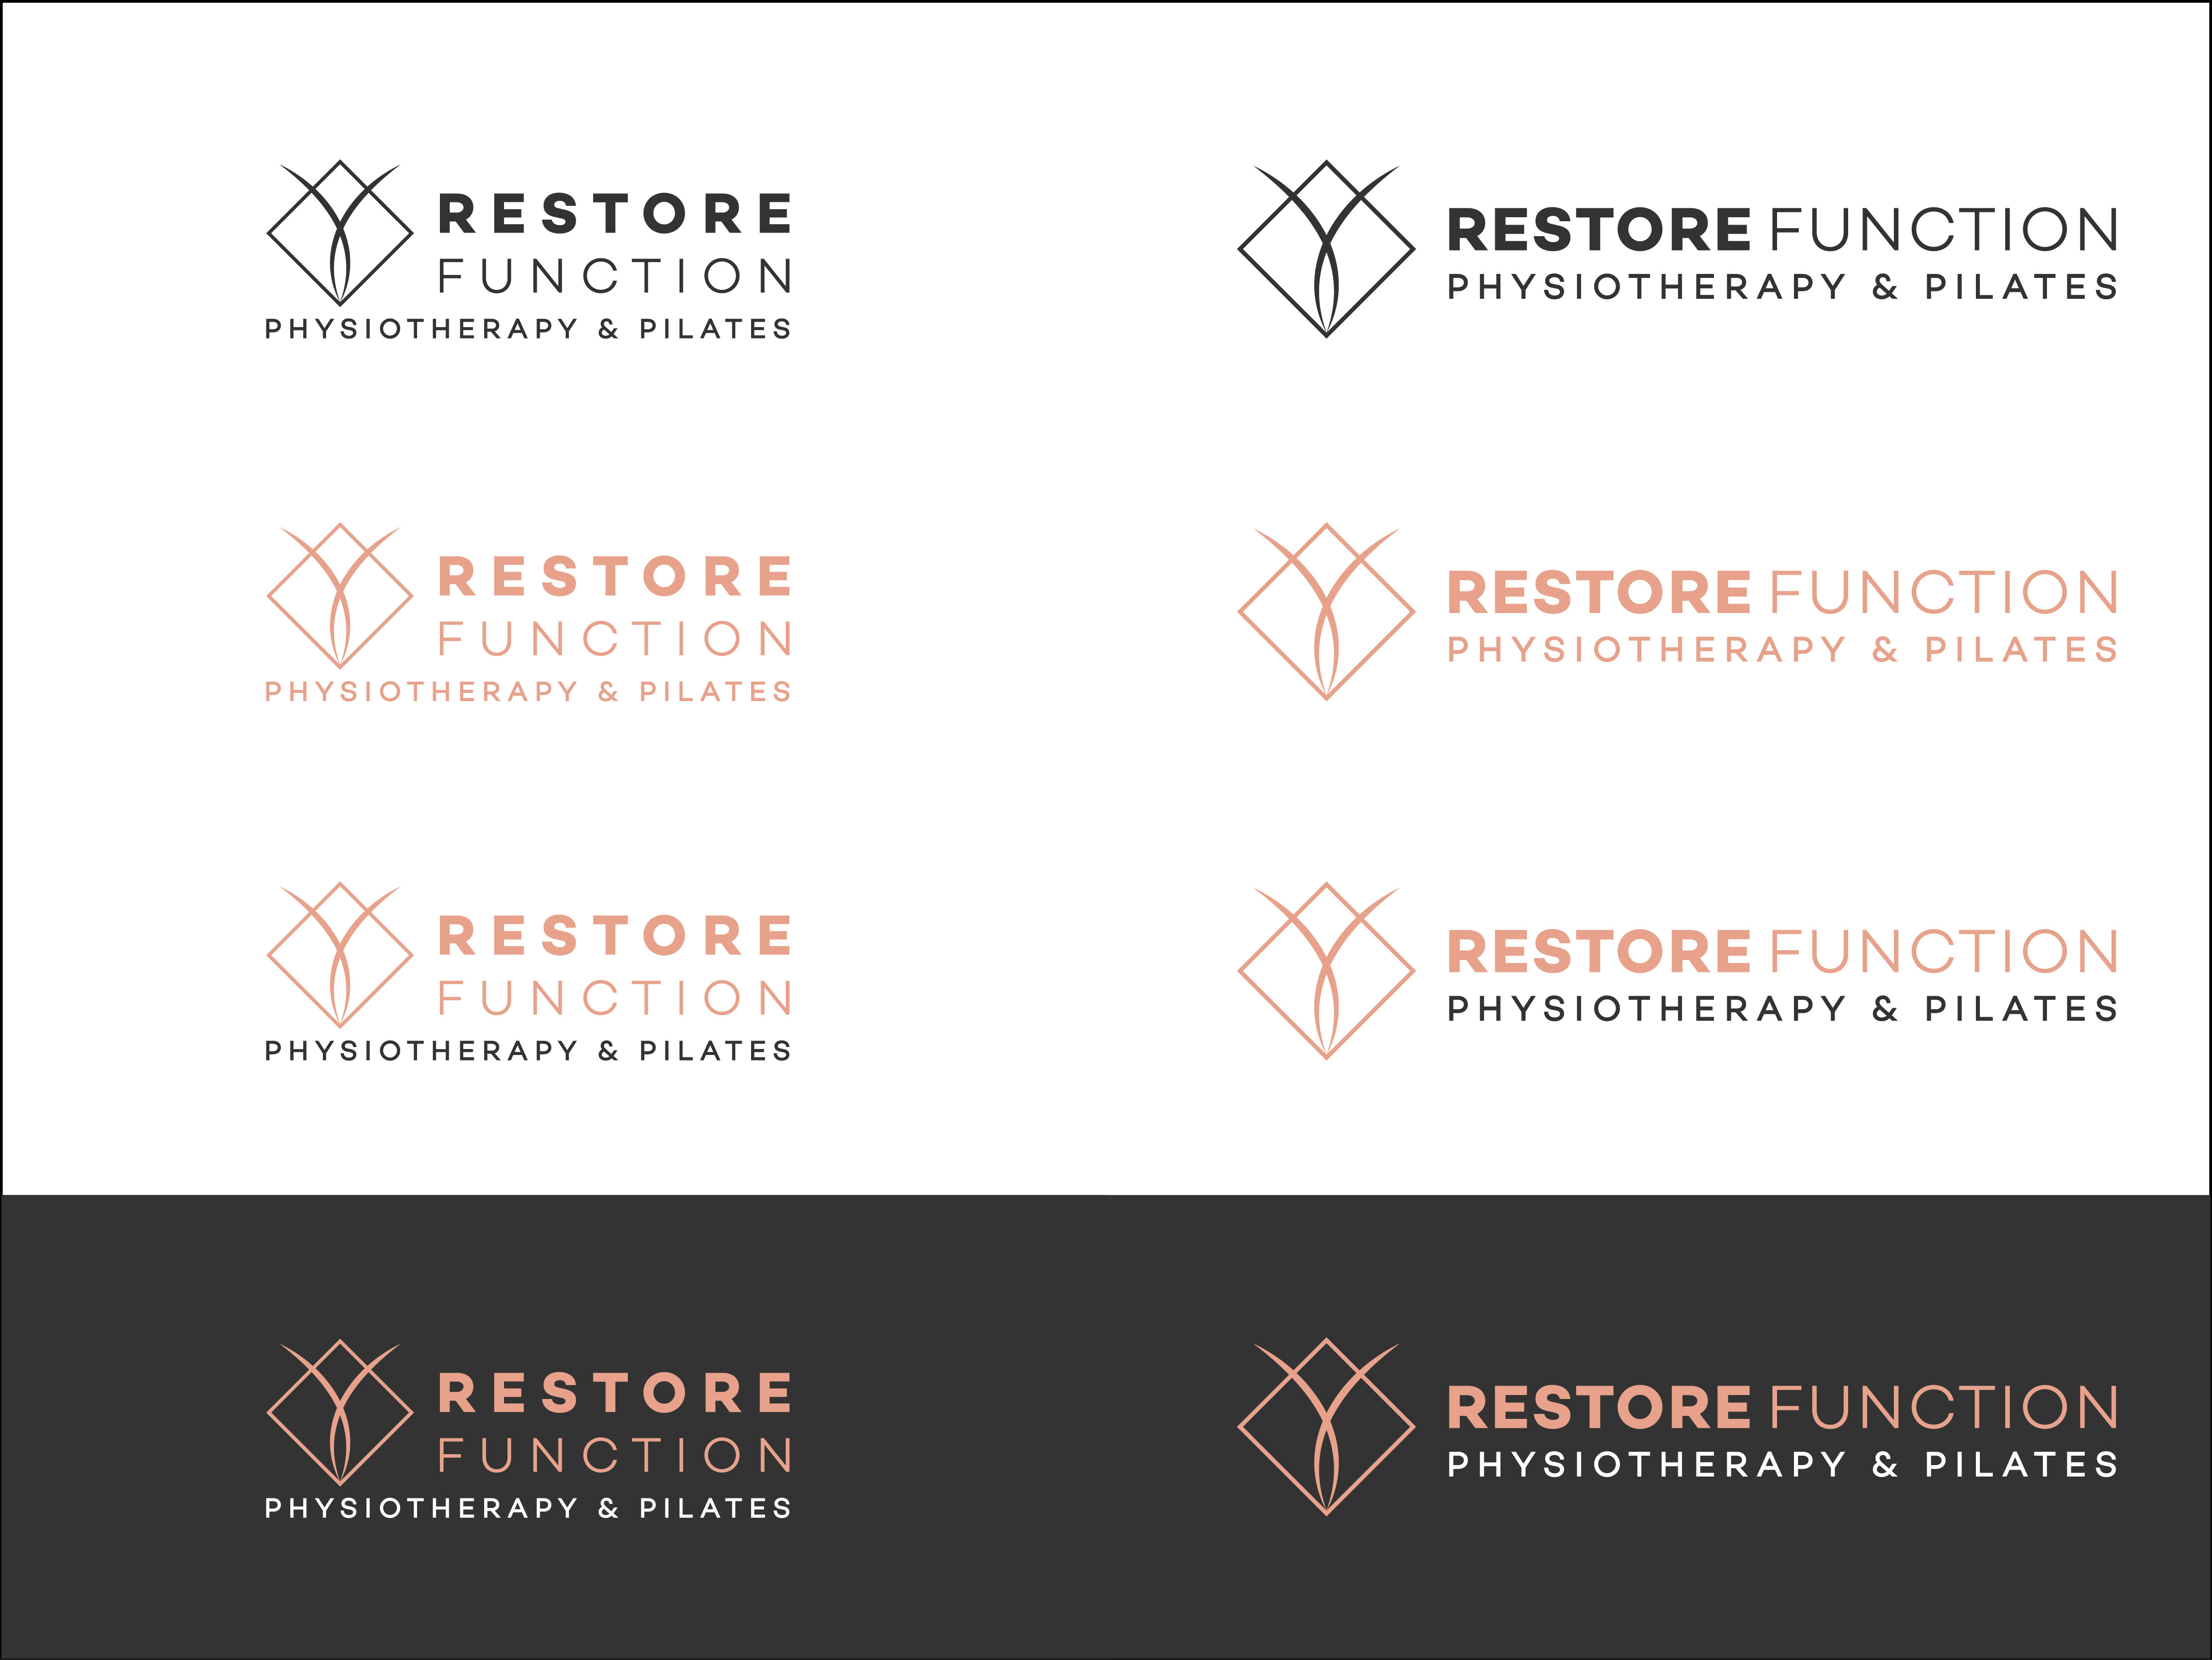 Restore Function Physiotherapy & Pilates logo design